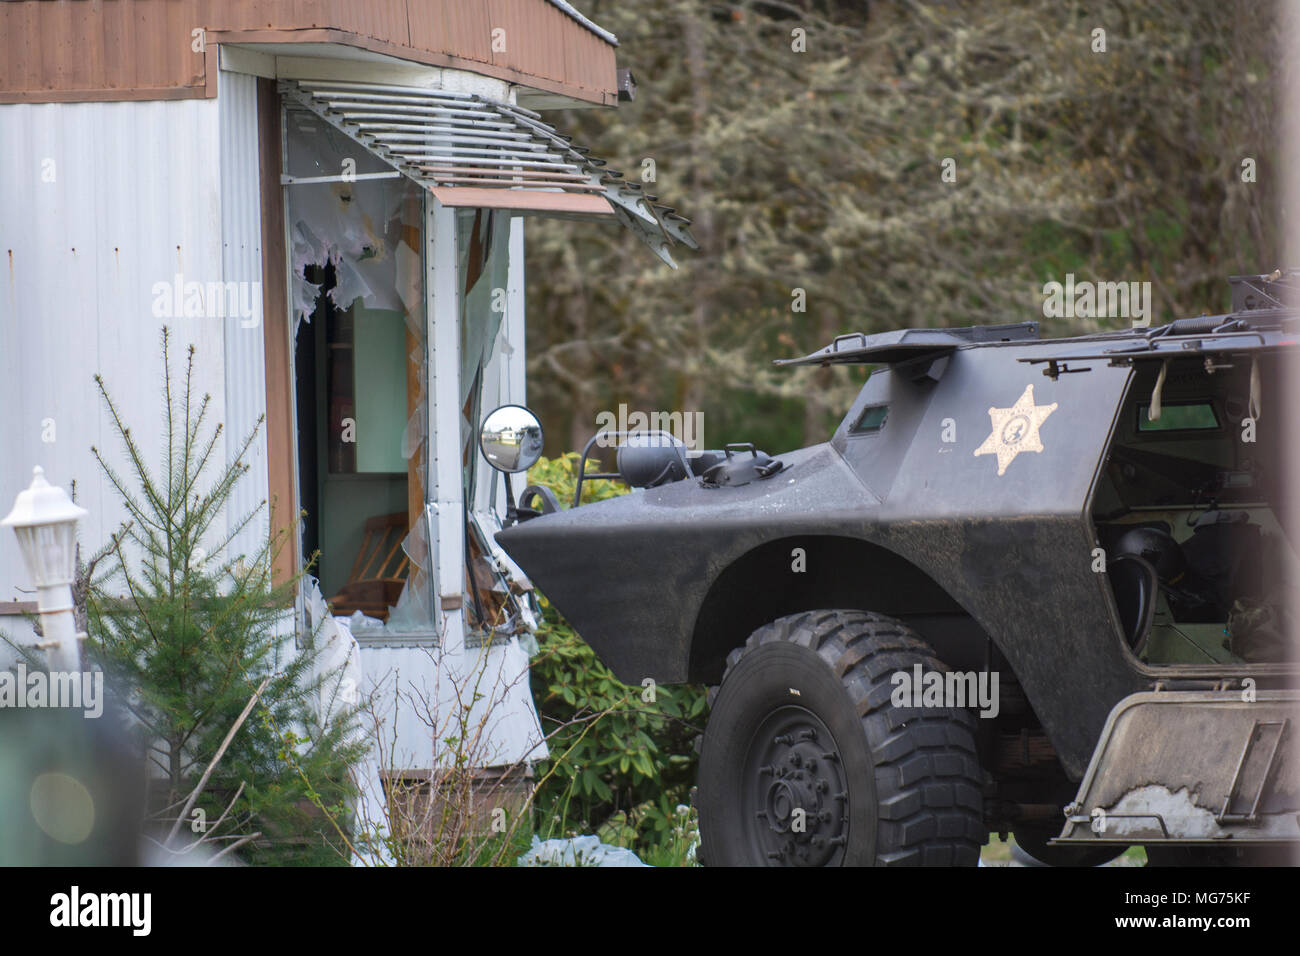 Shelton, Washington, USA, 27 April 2018.  Mason County Sheriff respond to the scene where a man stabbed a process server.  This was taken after the man was arrested and taken to the hospital witha dog bite wound.  It appears that police rammed the trailer with their SWAT vehicle.  (Shawna Whelan) Credit: Shawna Whelan/Alamy Live News Stock Photo